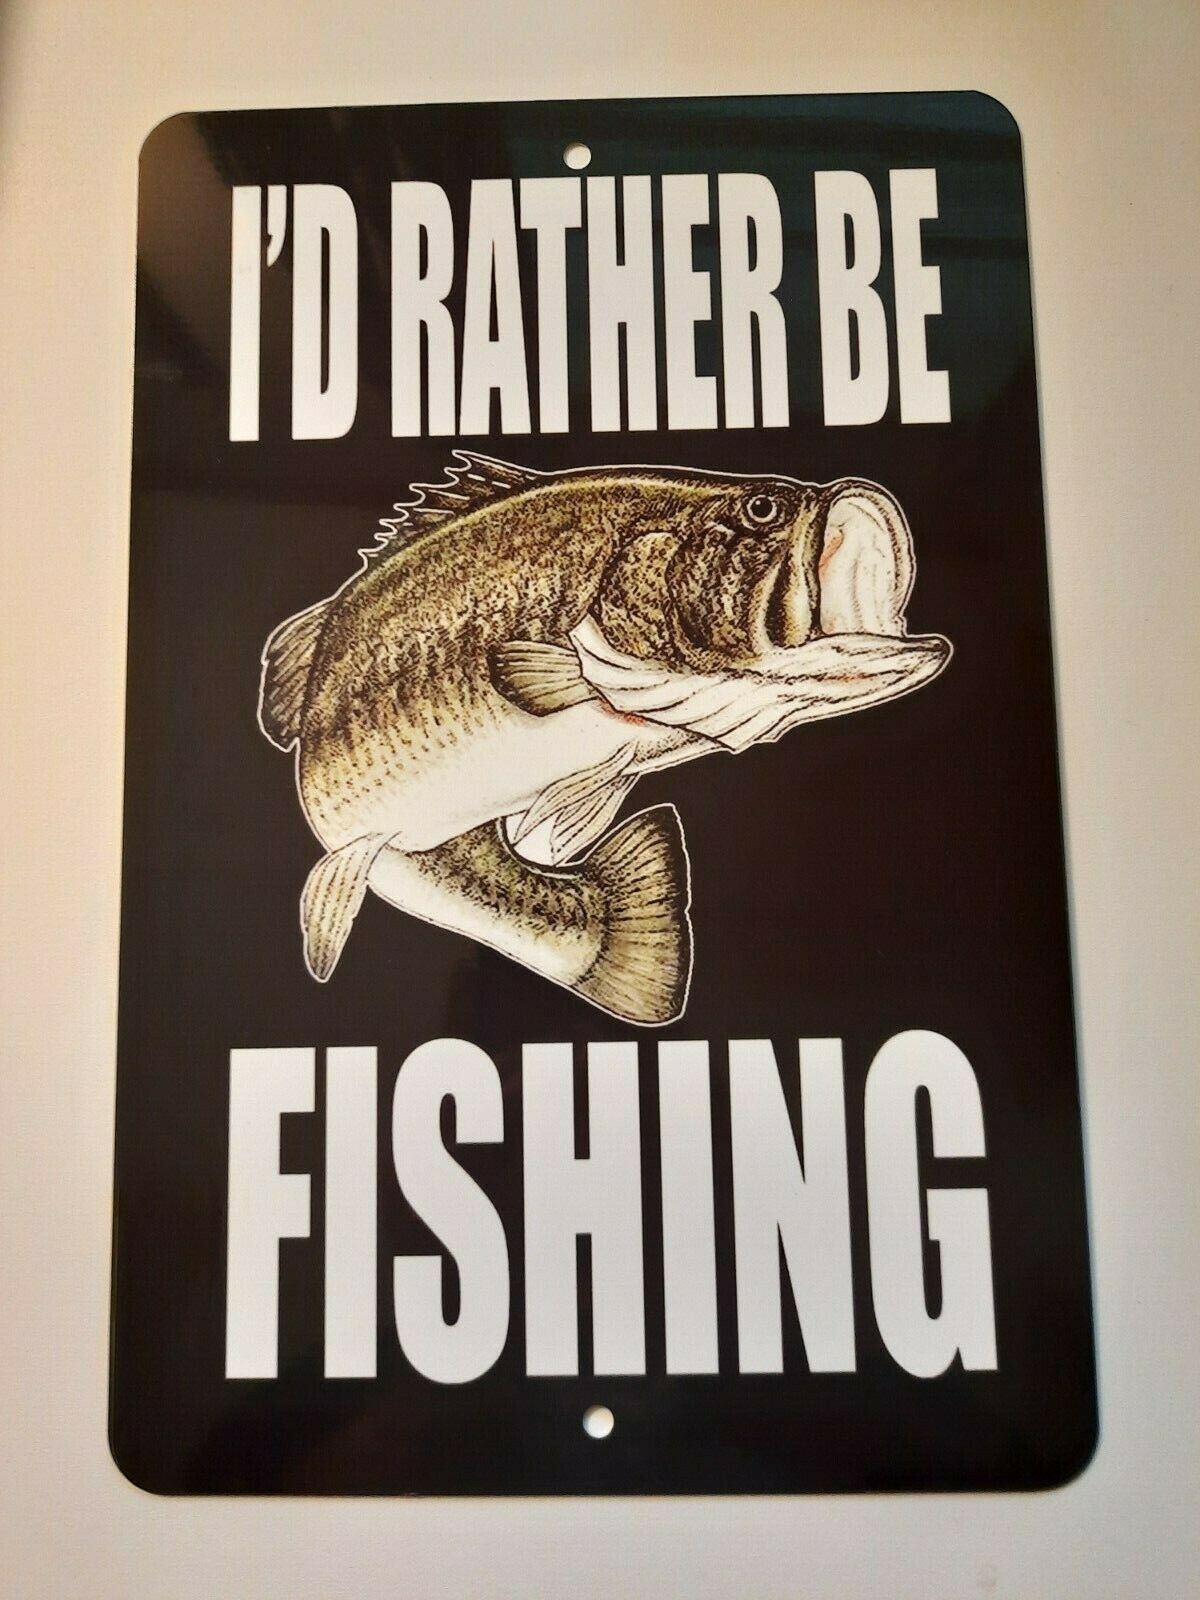 Id Rather Be Fishing 8x12 Metal Wall Sign Man Cave Garage Poster Great –  Sign Junky